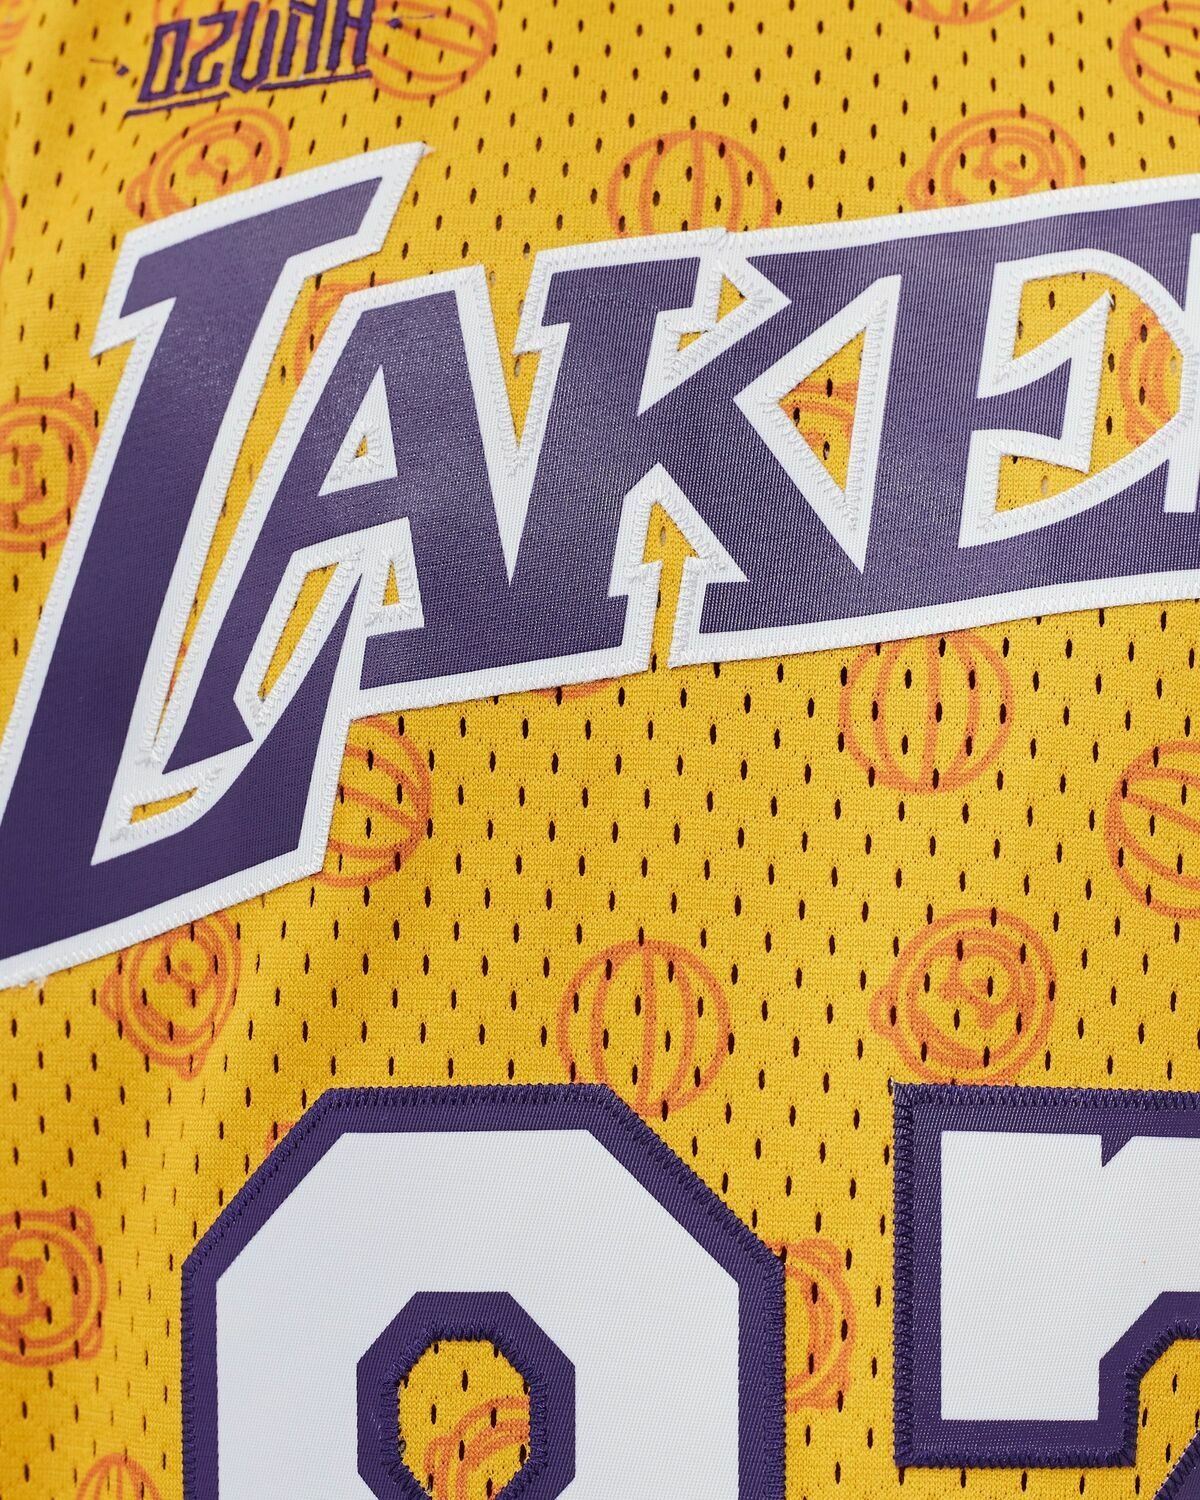 Maillot City Edition Los Angeles Lakers